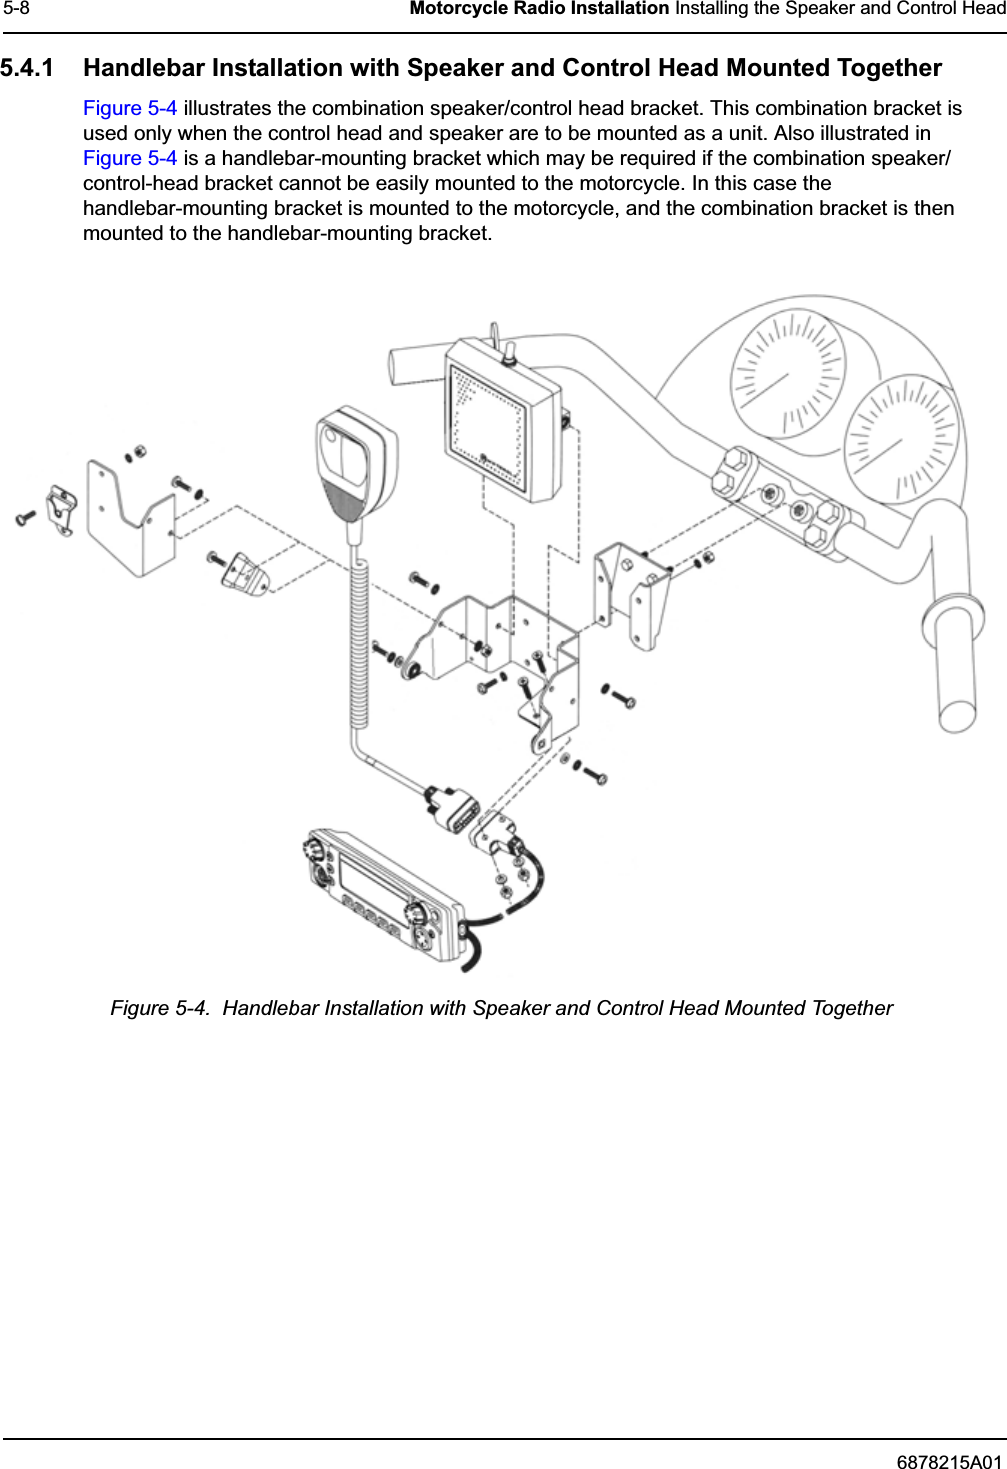 6878215A015-8 Motorcycle Radio Installation Installing the Speaker and Control Head5.4.1 Handlebar Installation with Speaker and Control Head Mounted TogetherFigure 5-4 illustrates the combination speaker/control head bracket. This combination bracket is used only when the control head and speaker are to be mounted as a unit. Also illustrated in Figure 5-4 is a handlebar-mounting bracket which may be required if the combination speaker/control-head bracket cannot be easily mounted to the motorcycle. In this case the handlebar-mounting bracket is mounted to the motorcycle, and the combination bracket is then mounted to the handlebar-mounting bracket.Figure 5-4.  Handlebar Installation with Speaker and Control Head Mounted Together